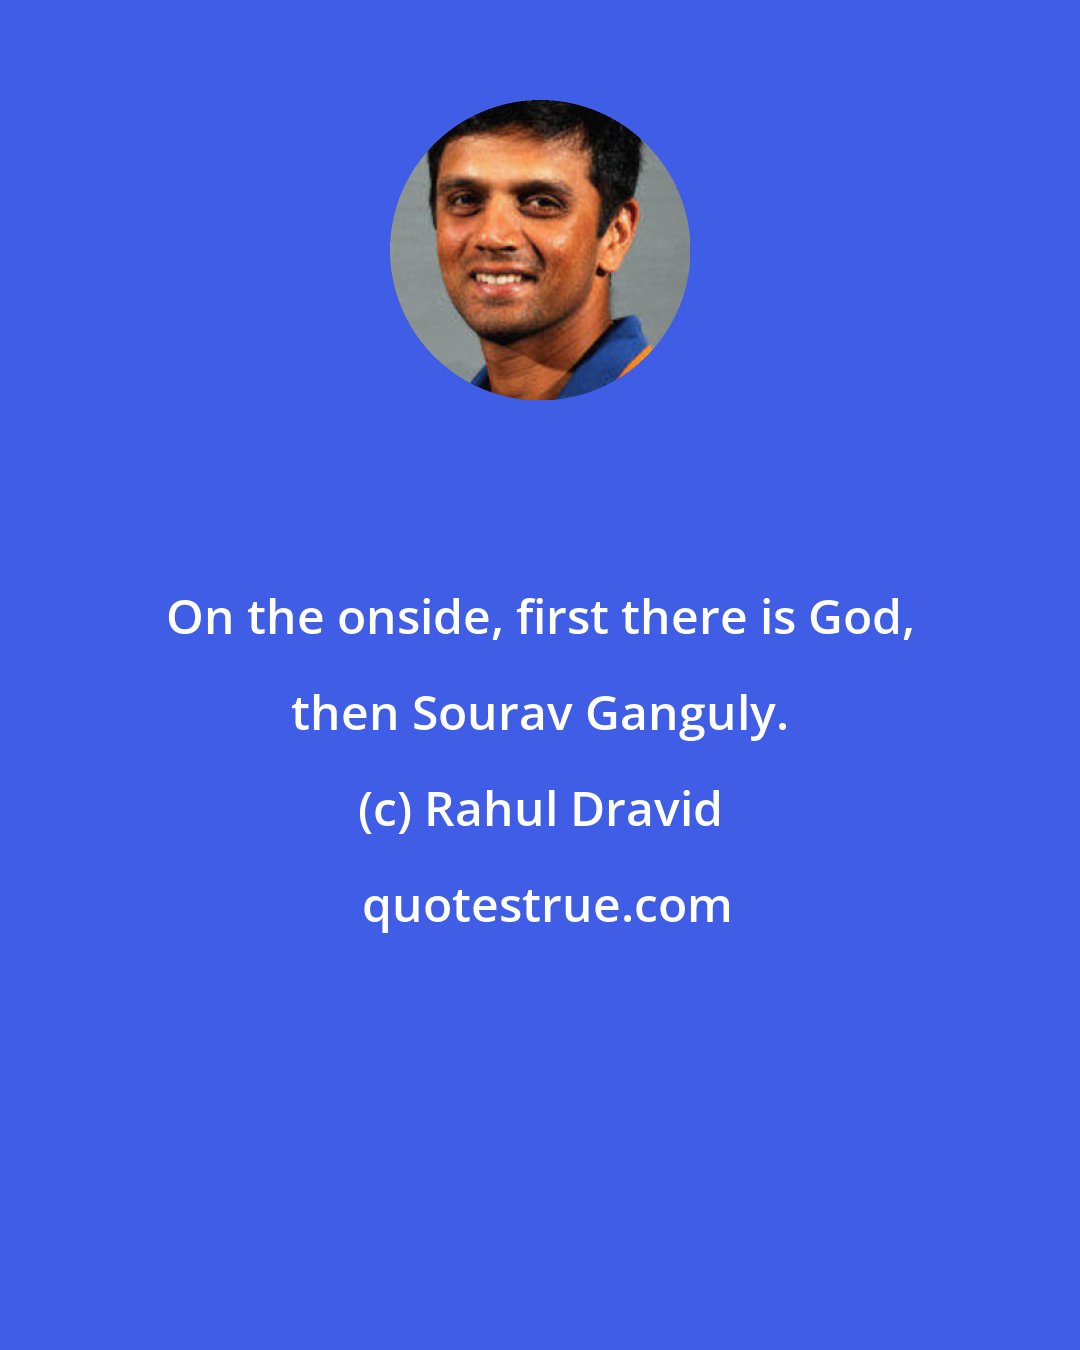 Rahul Dravid: On the onside, first there is God, then Sourav Ganguly.